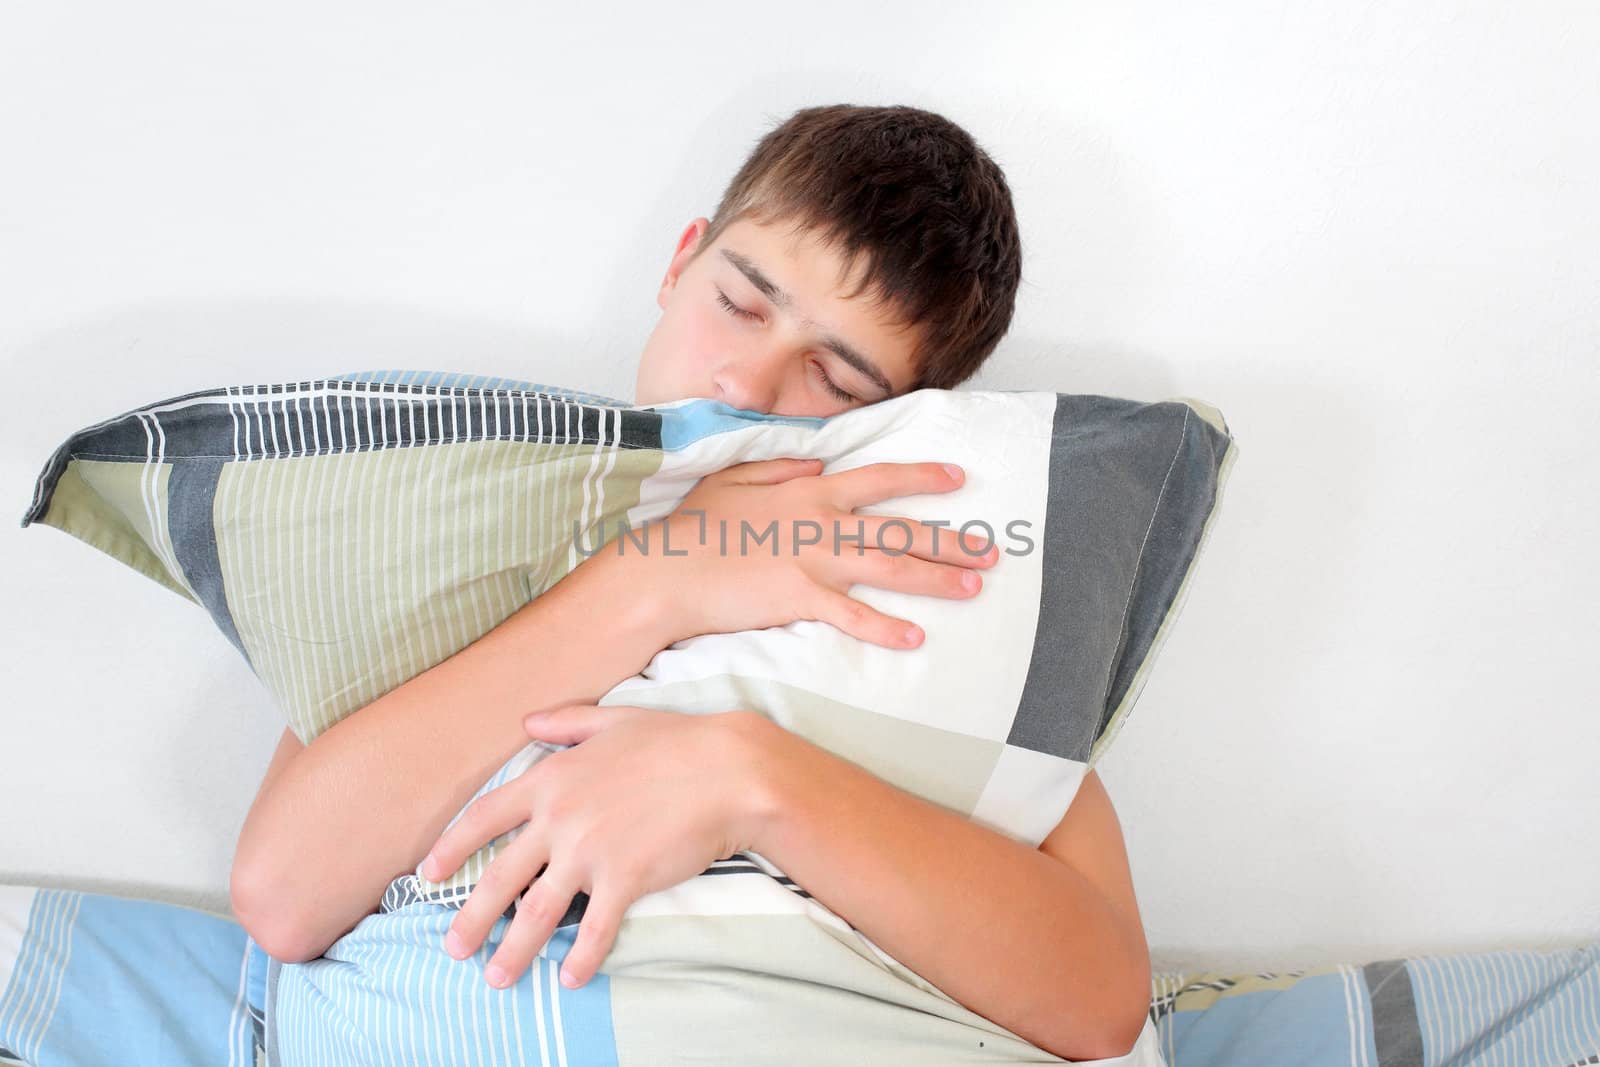 Sad Teenager sitting with pillow on the Bed in Home interior